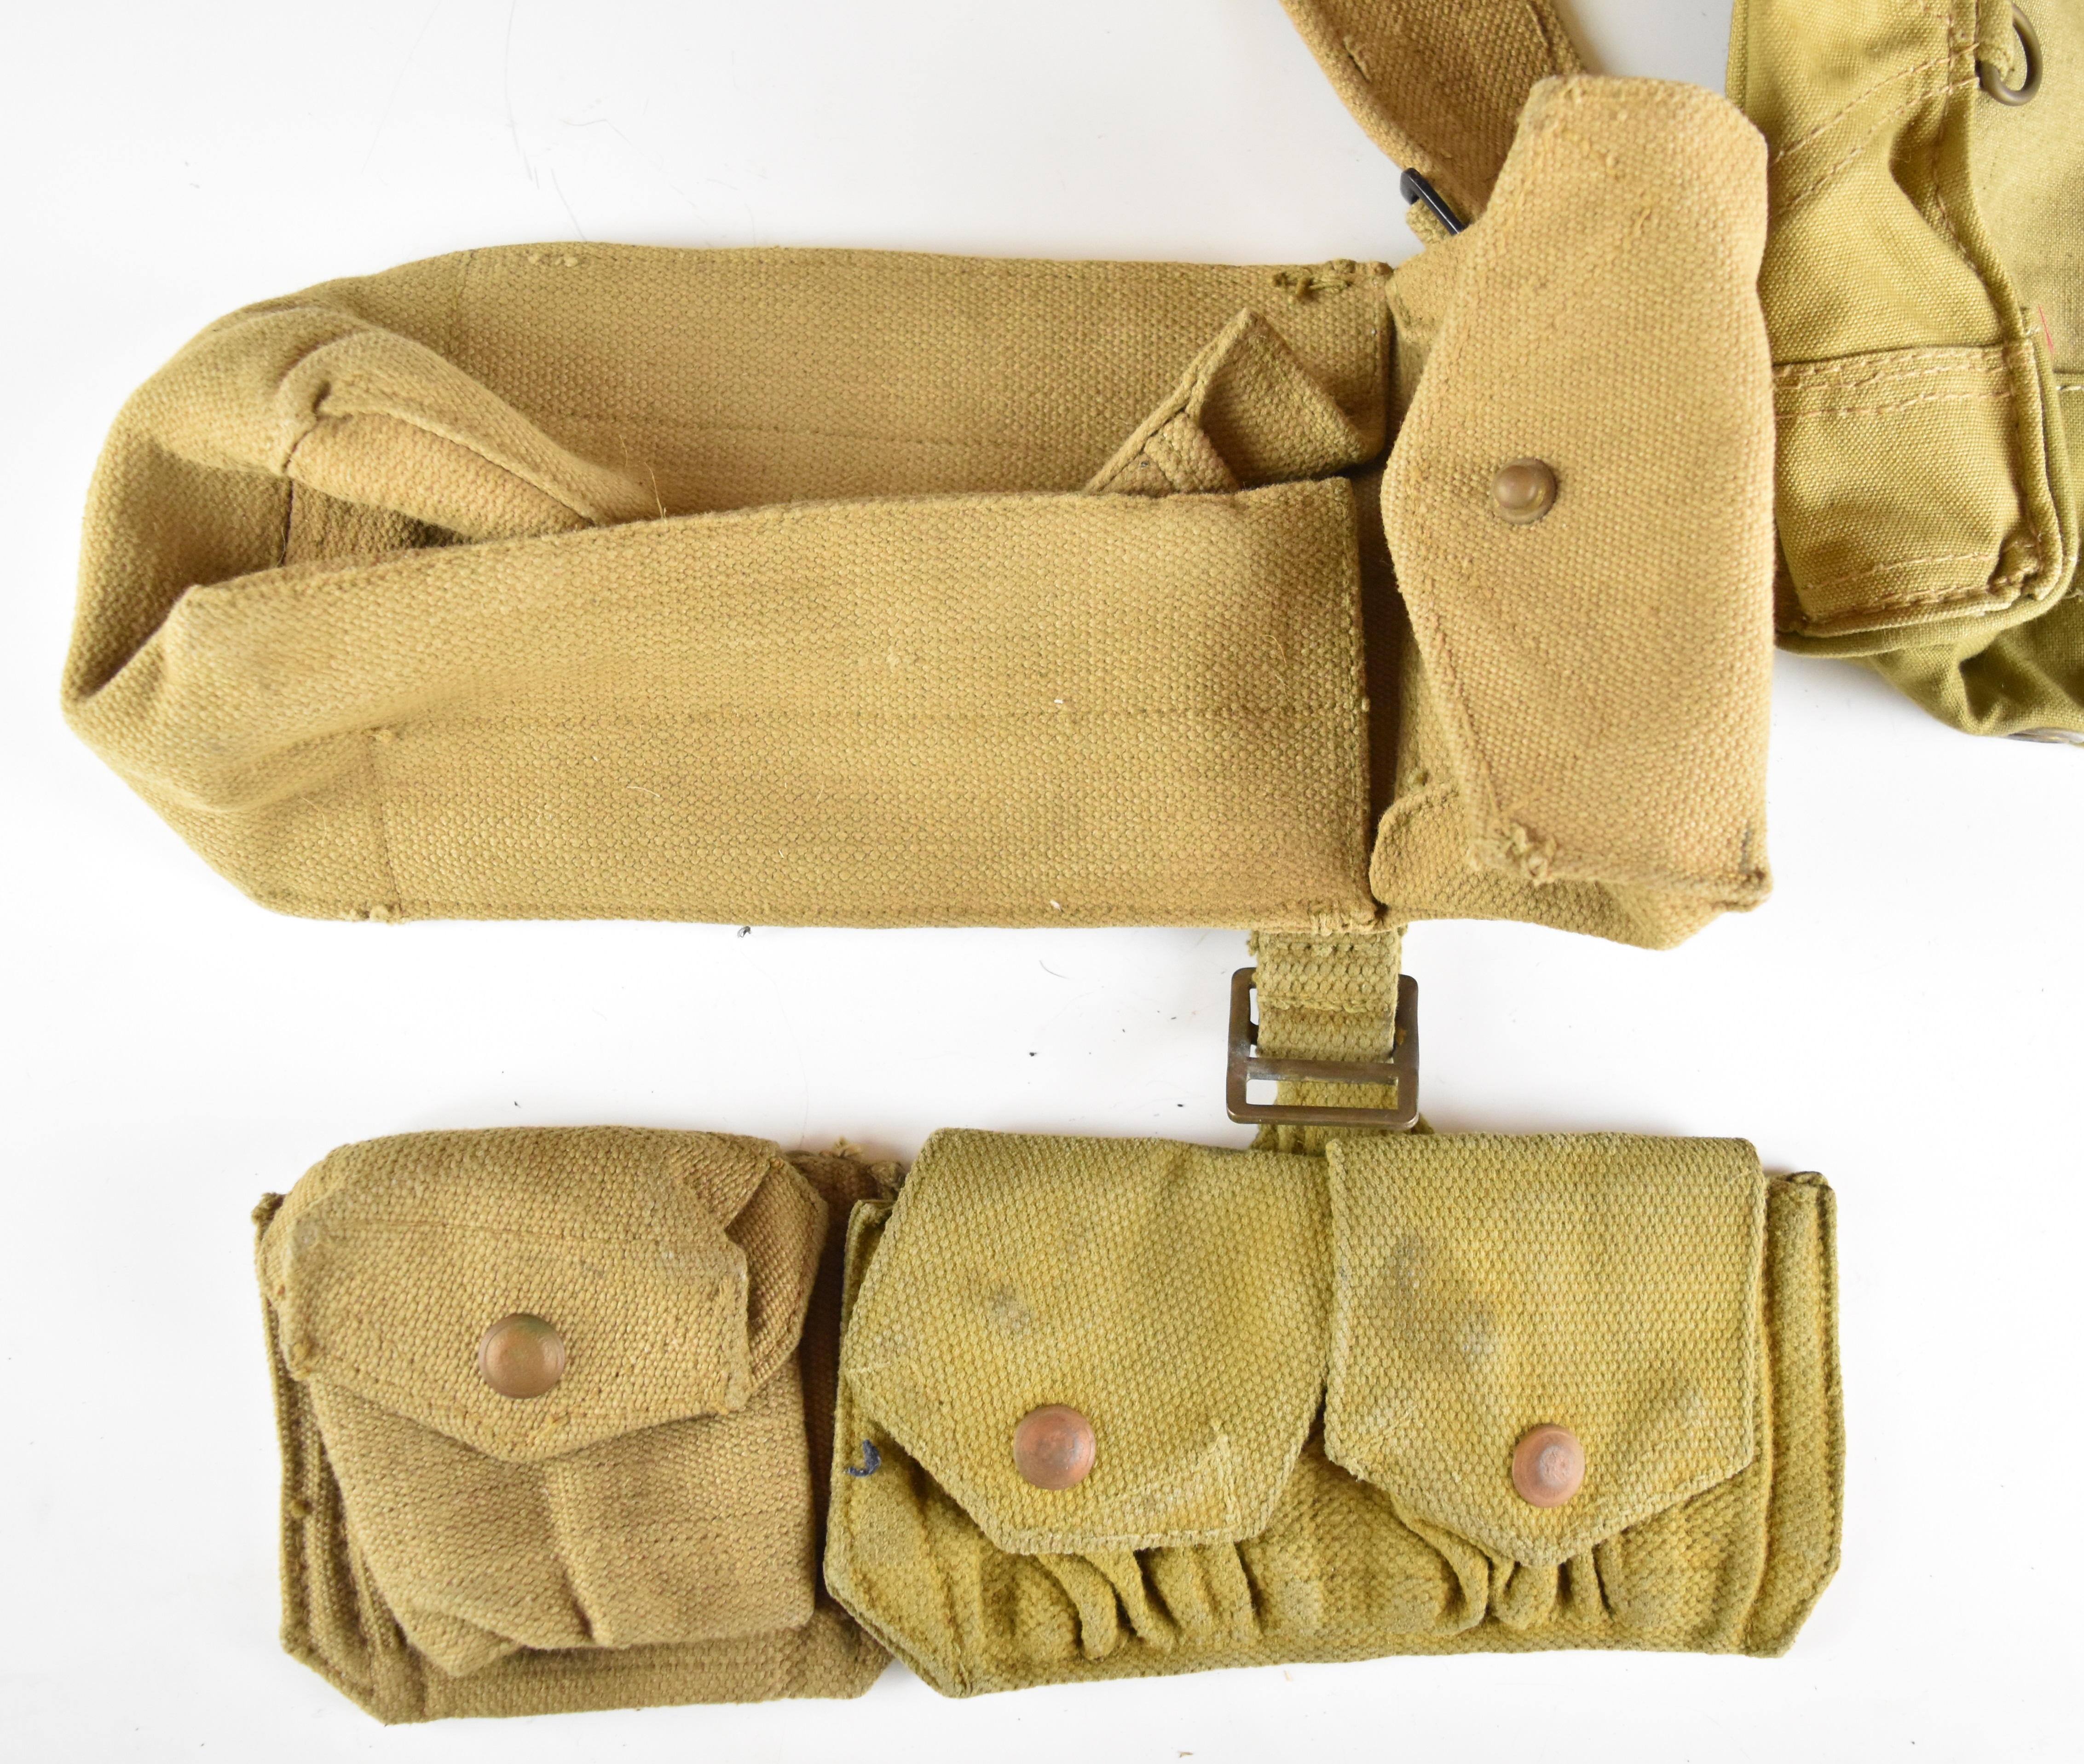 British WW2 webbing including ammunition pouches, belts, holsters, sling, lanyard and haversack, all - Image 5 of 11